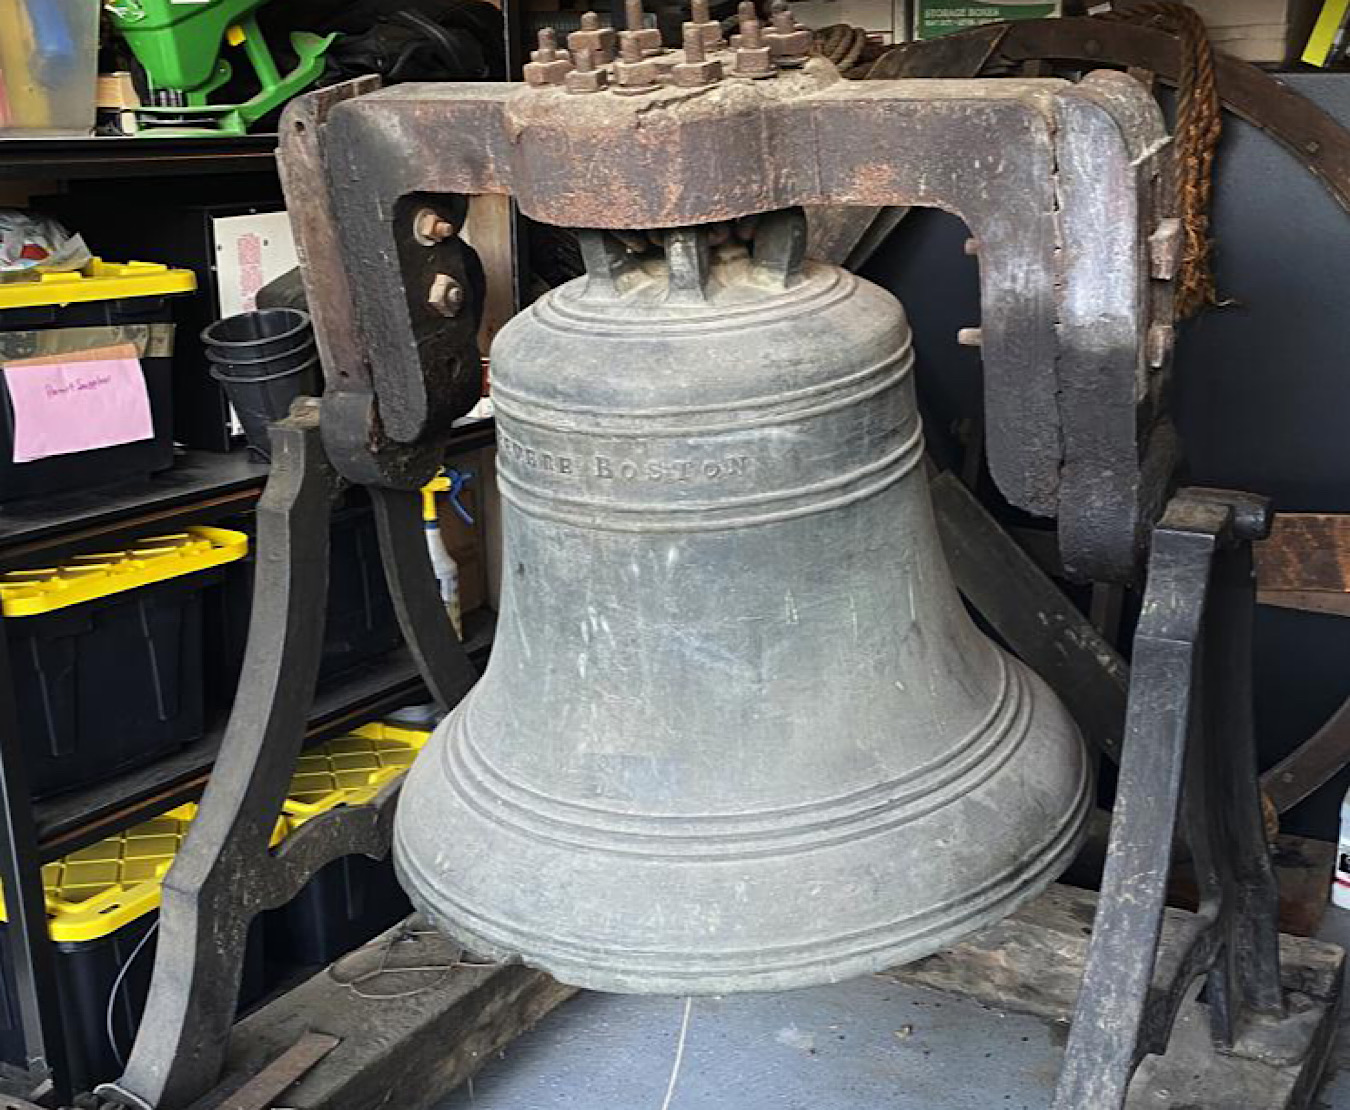 188-year-old bronze church bell rests on supports on the floor of a garage with clutter in the background